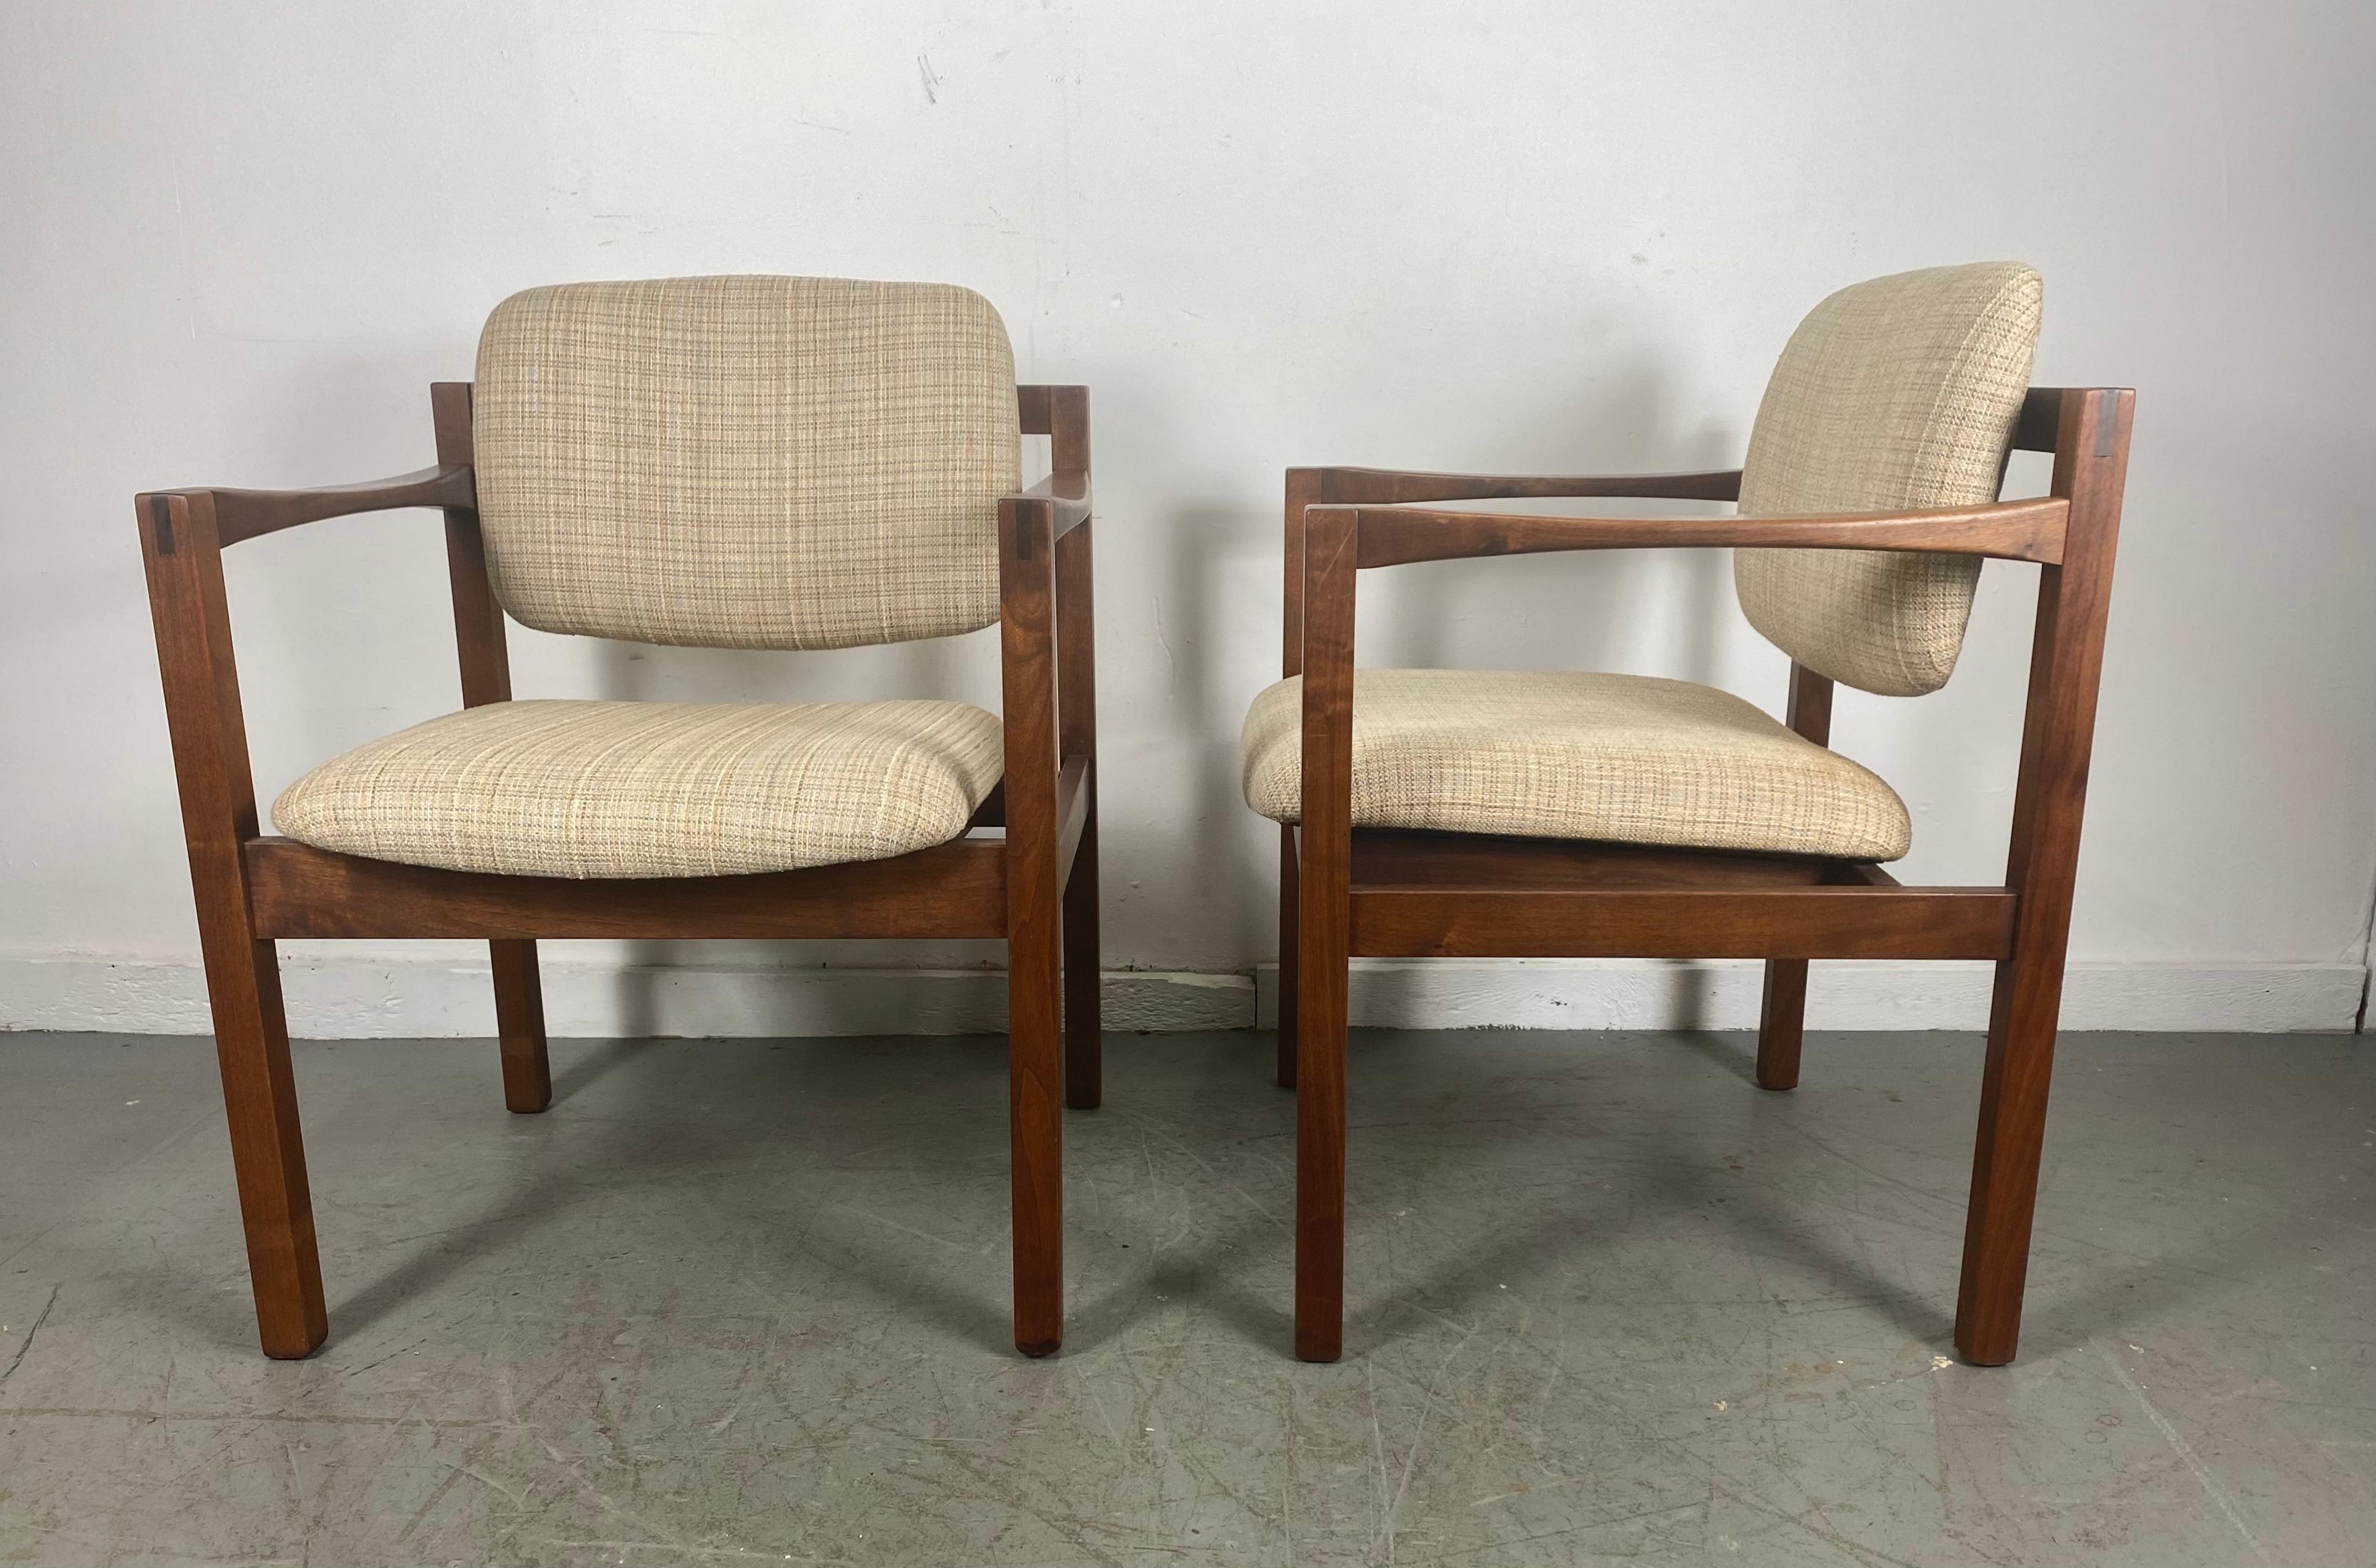 Stunning Pair Modernist Walnut Arm Chairs by Stow Davis /after Jens Risom For Sale 1